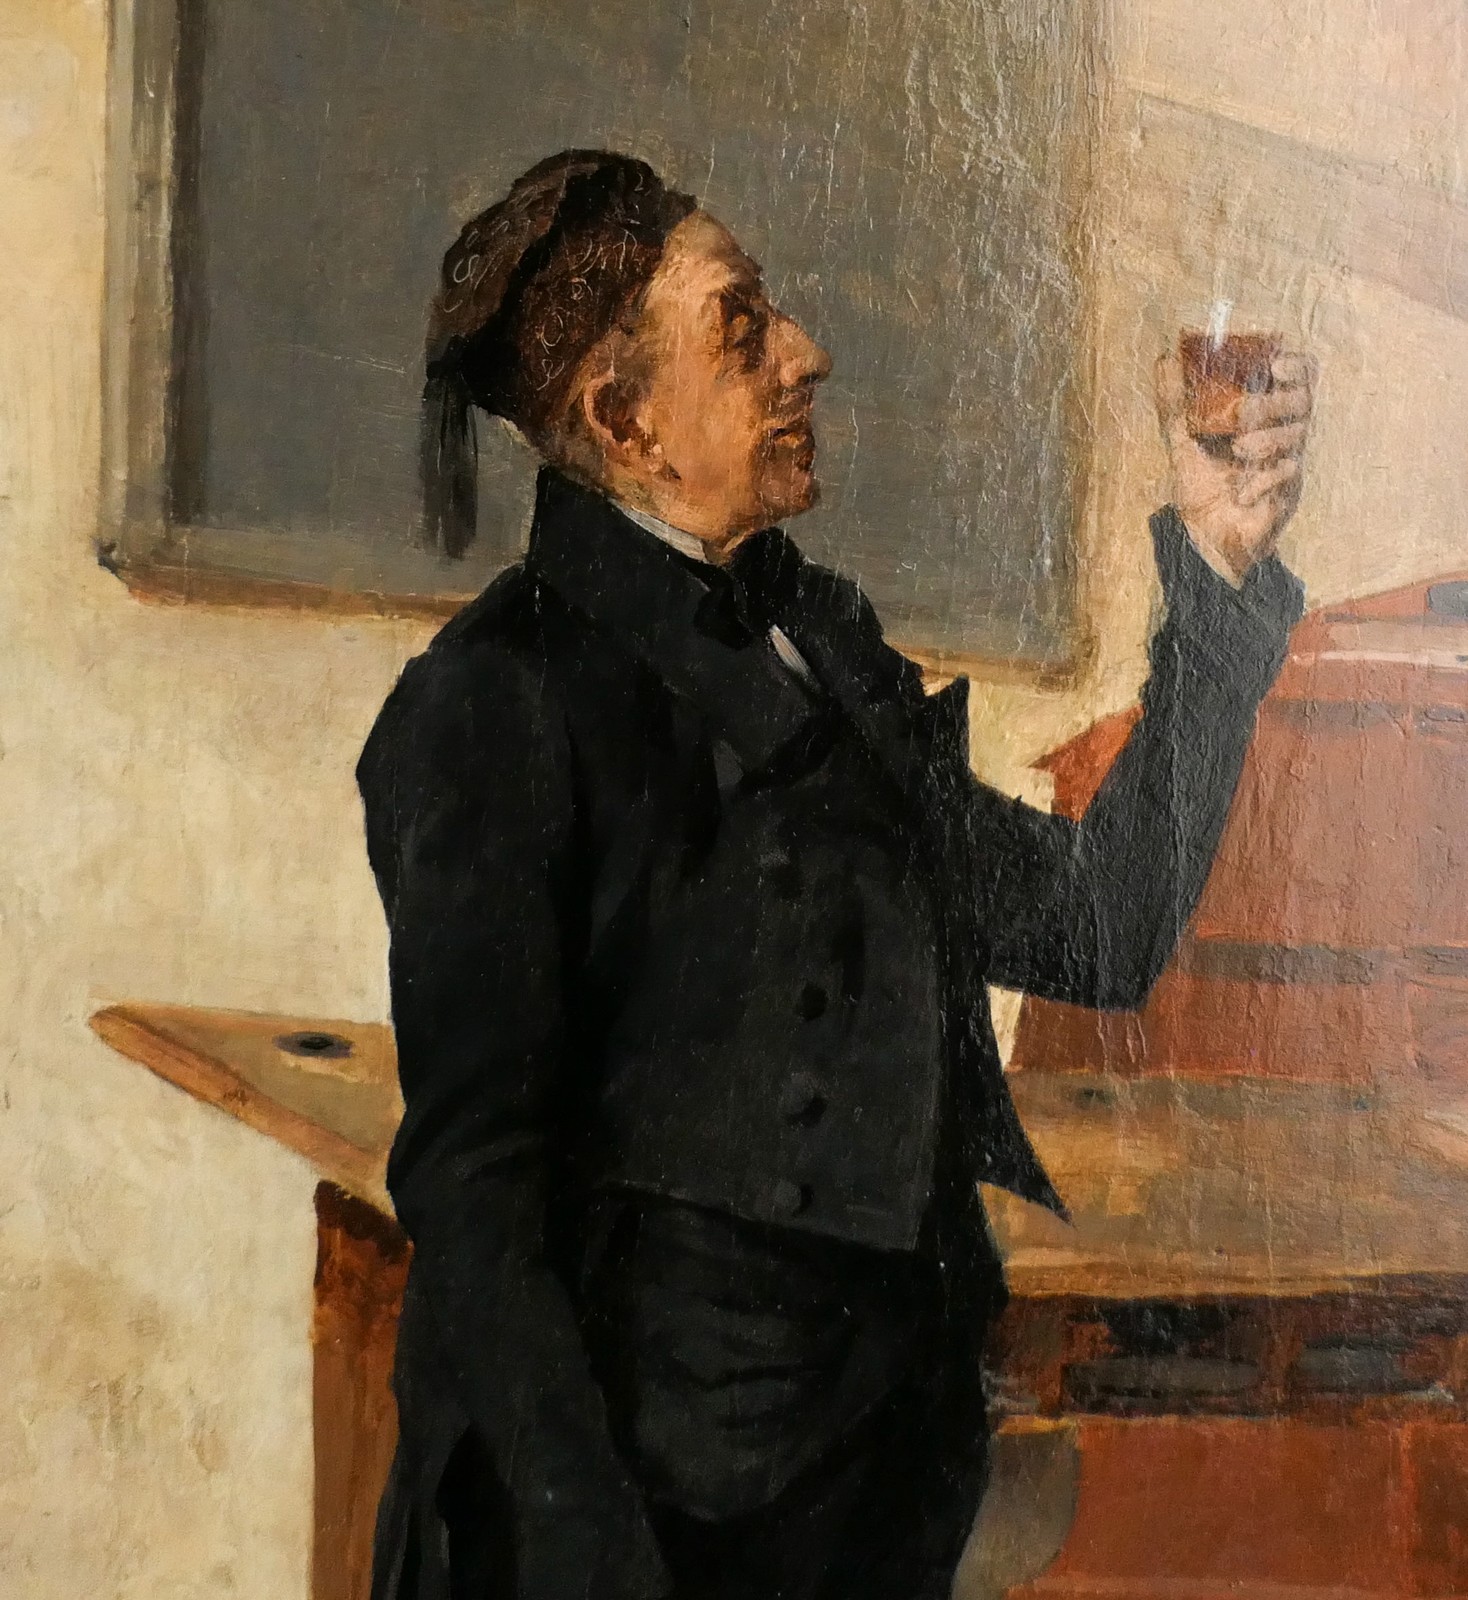 Portielje G., the well-deserved glass, oil on canvas, dated 10 June 1889 and signed on the back, - Image 5 of 8